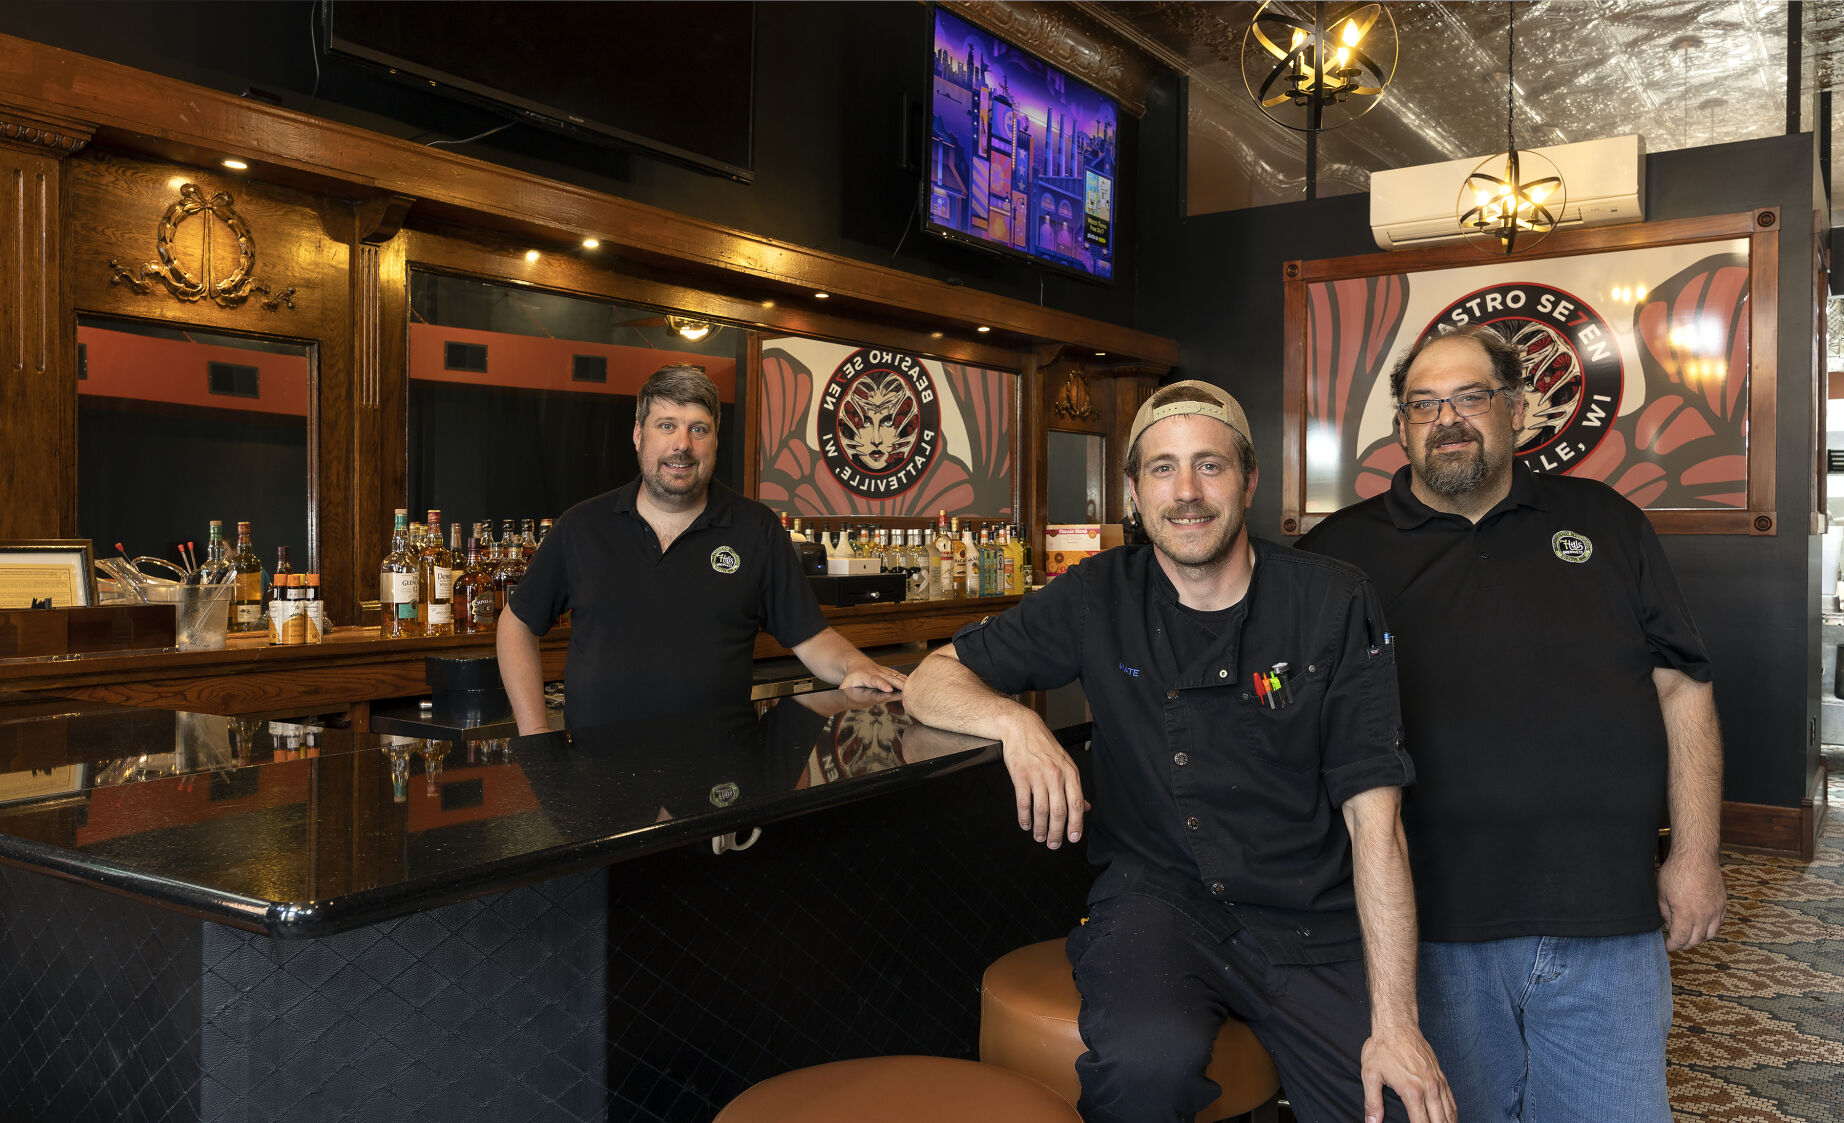 7 Hills Brewing Co. front of house manager Jeremy Hall, (left) Beastro Se7en chef Nate Holland and General Manager John Reuter inside Beastro Se7en on Second Street in Platteville, Wis.    PHOTO CREDIT: Stephen Gassman